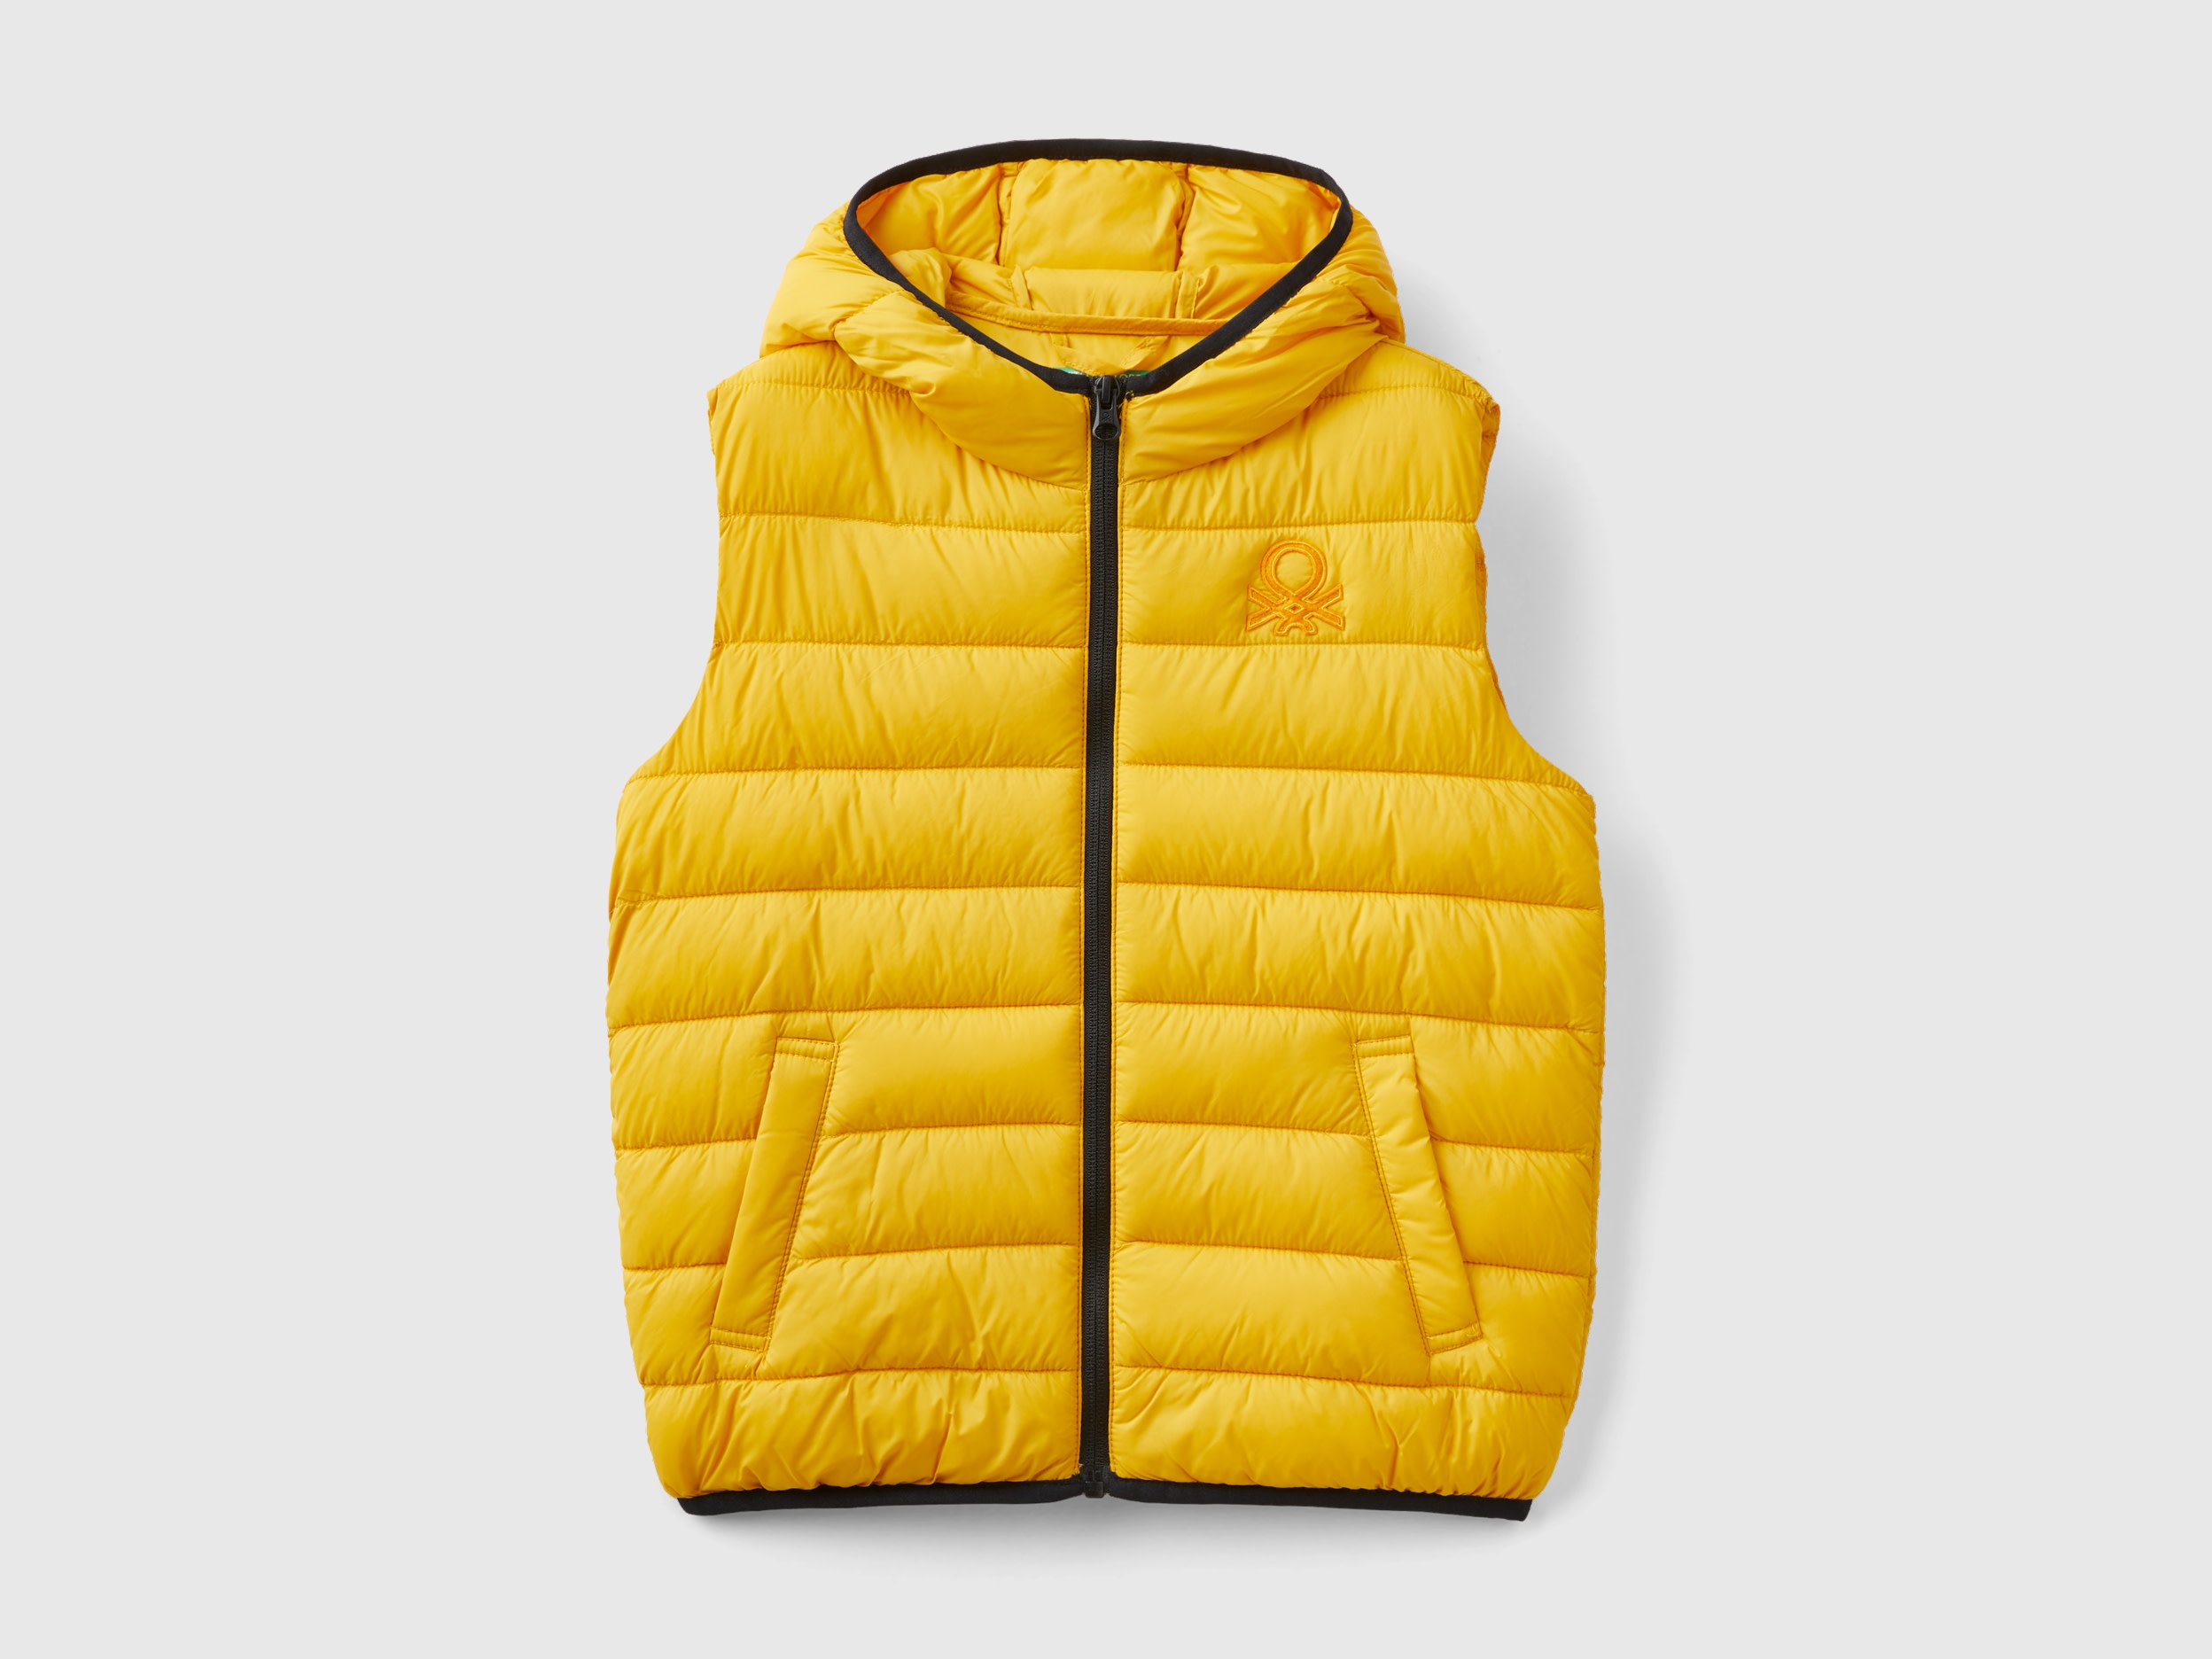 Benetton, Padded Jacket With Hood, size L, Yellow, Kids